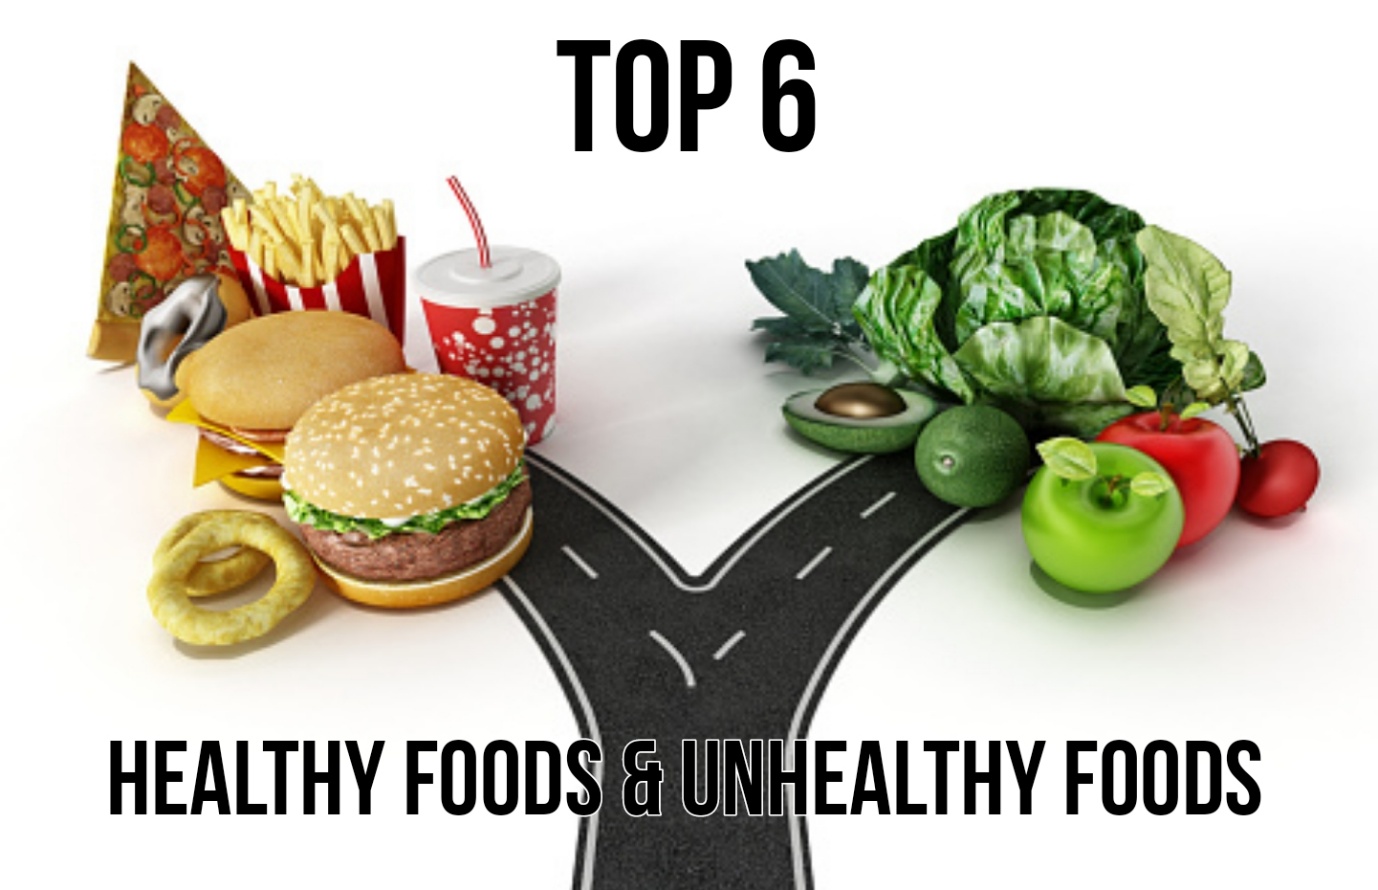 Top 6 Healthy Foods and Unhealthy Foods